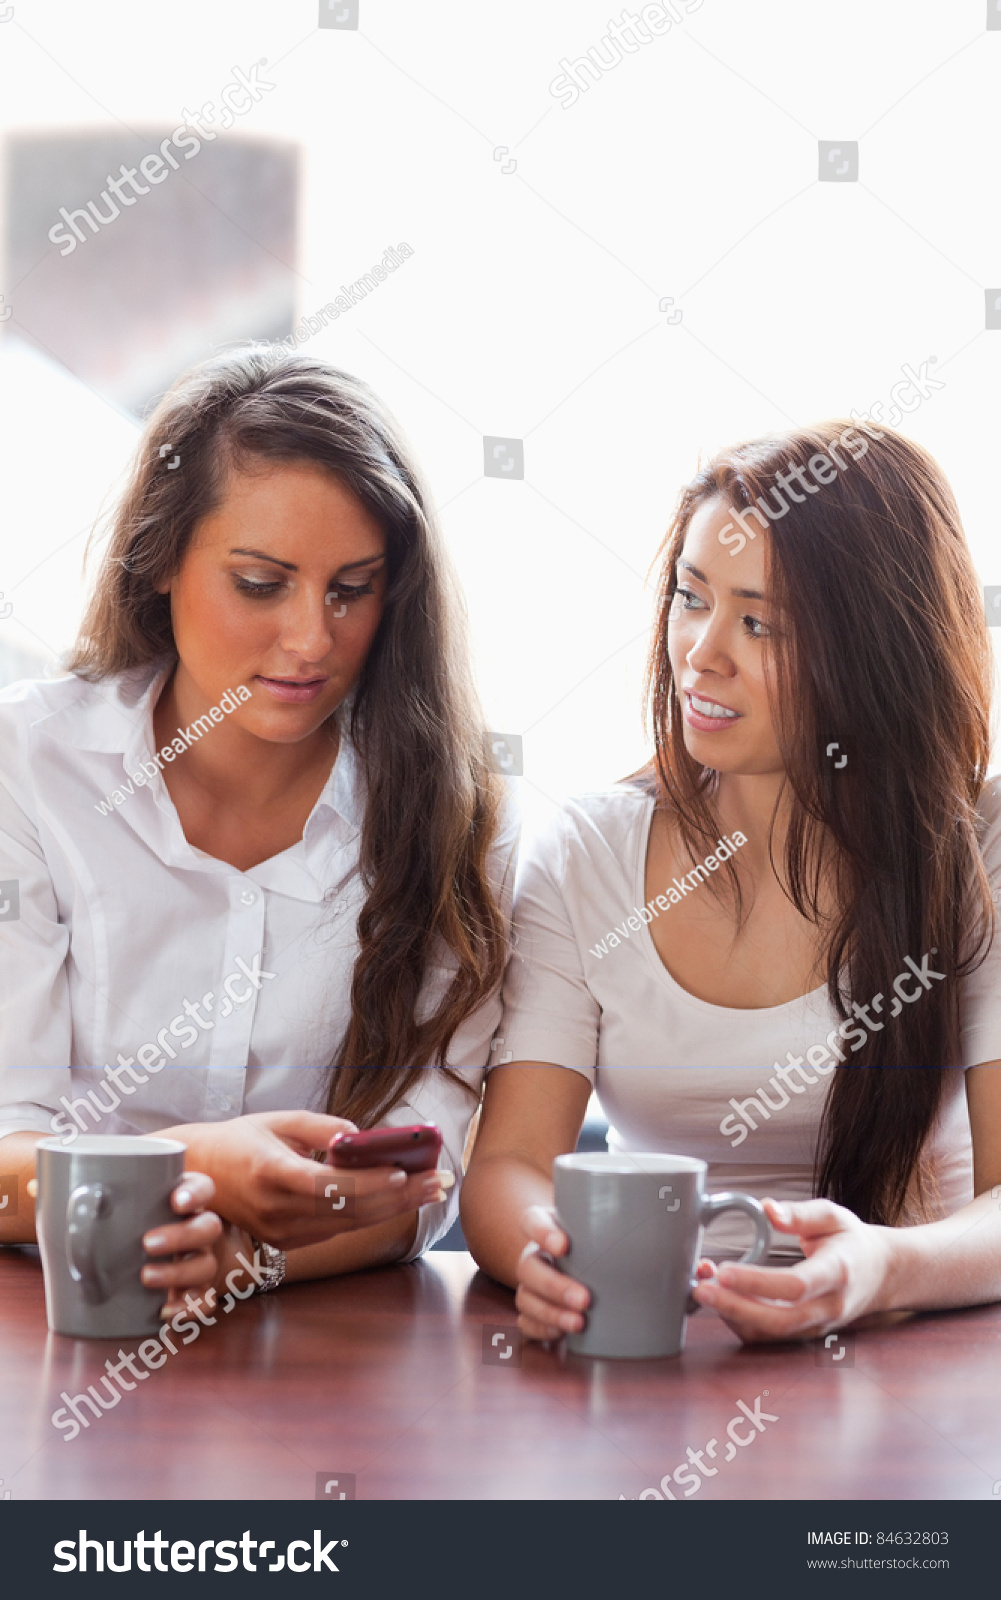 Portrait of friends looking at a smartphone while having a coffee #84632803